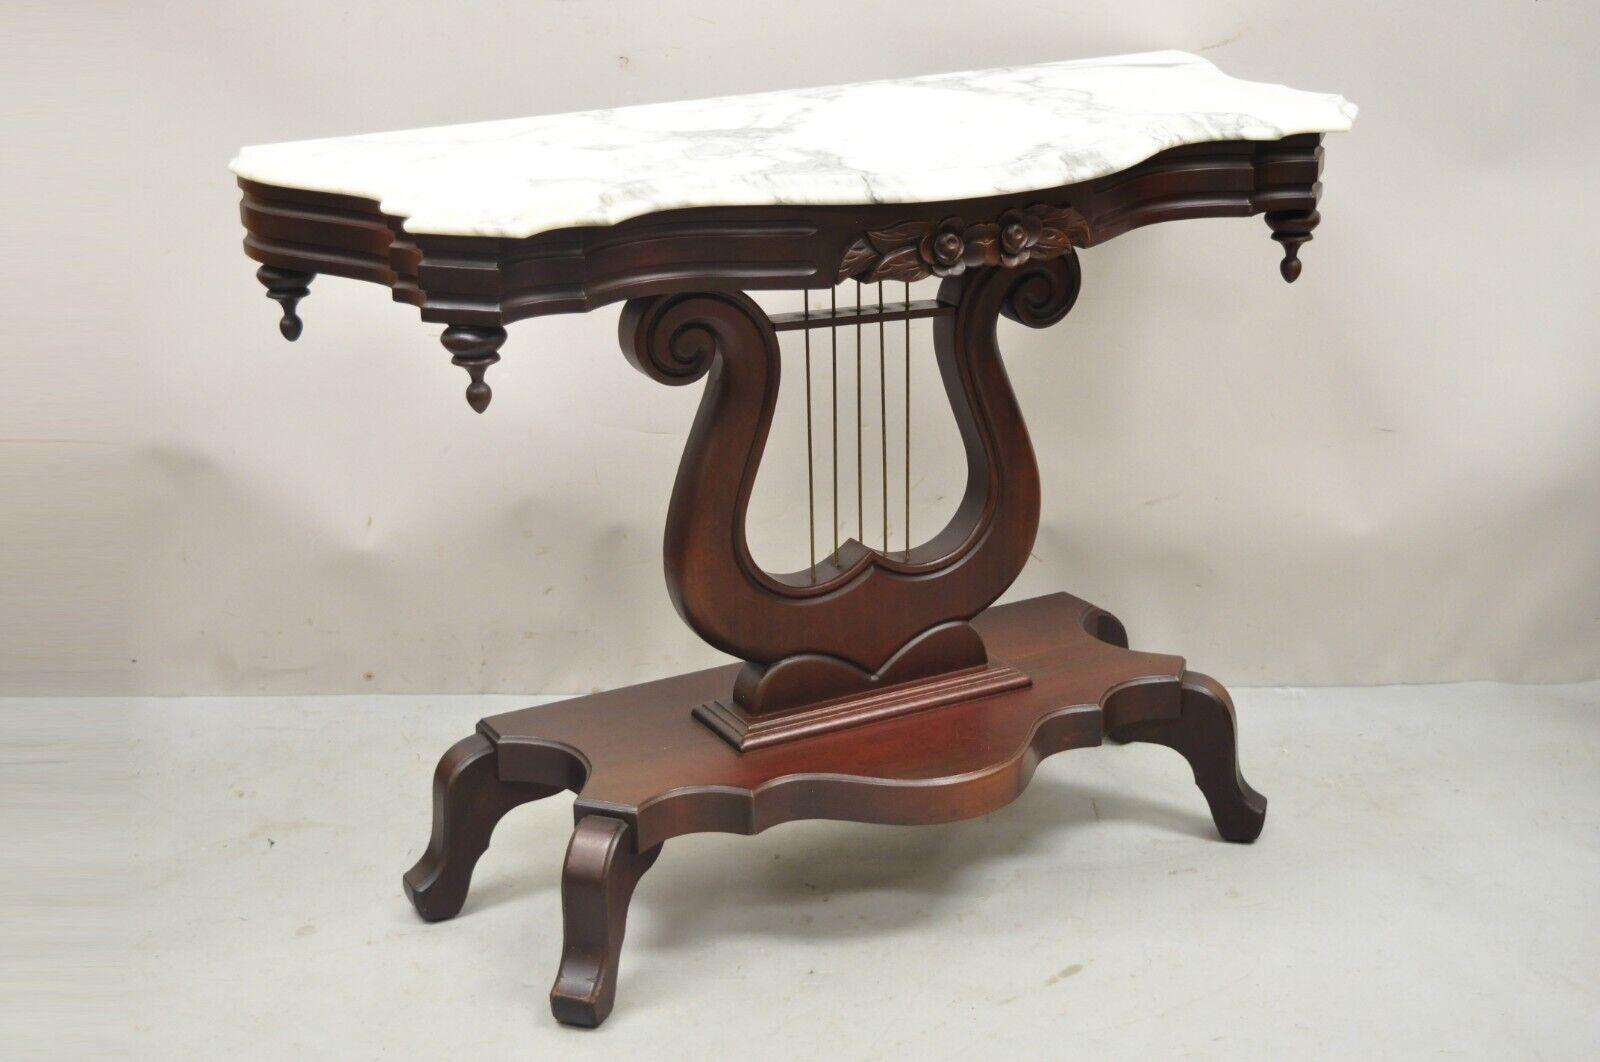 Vintage Victorian style J.B. Van Sciver marble top Mahogany Harp Lyre console table. Item features shaped Italian marble top, mahogany carved harp base with brass 